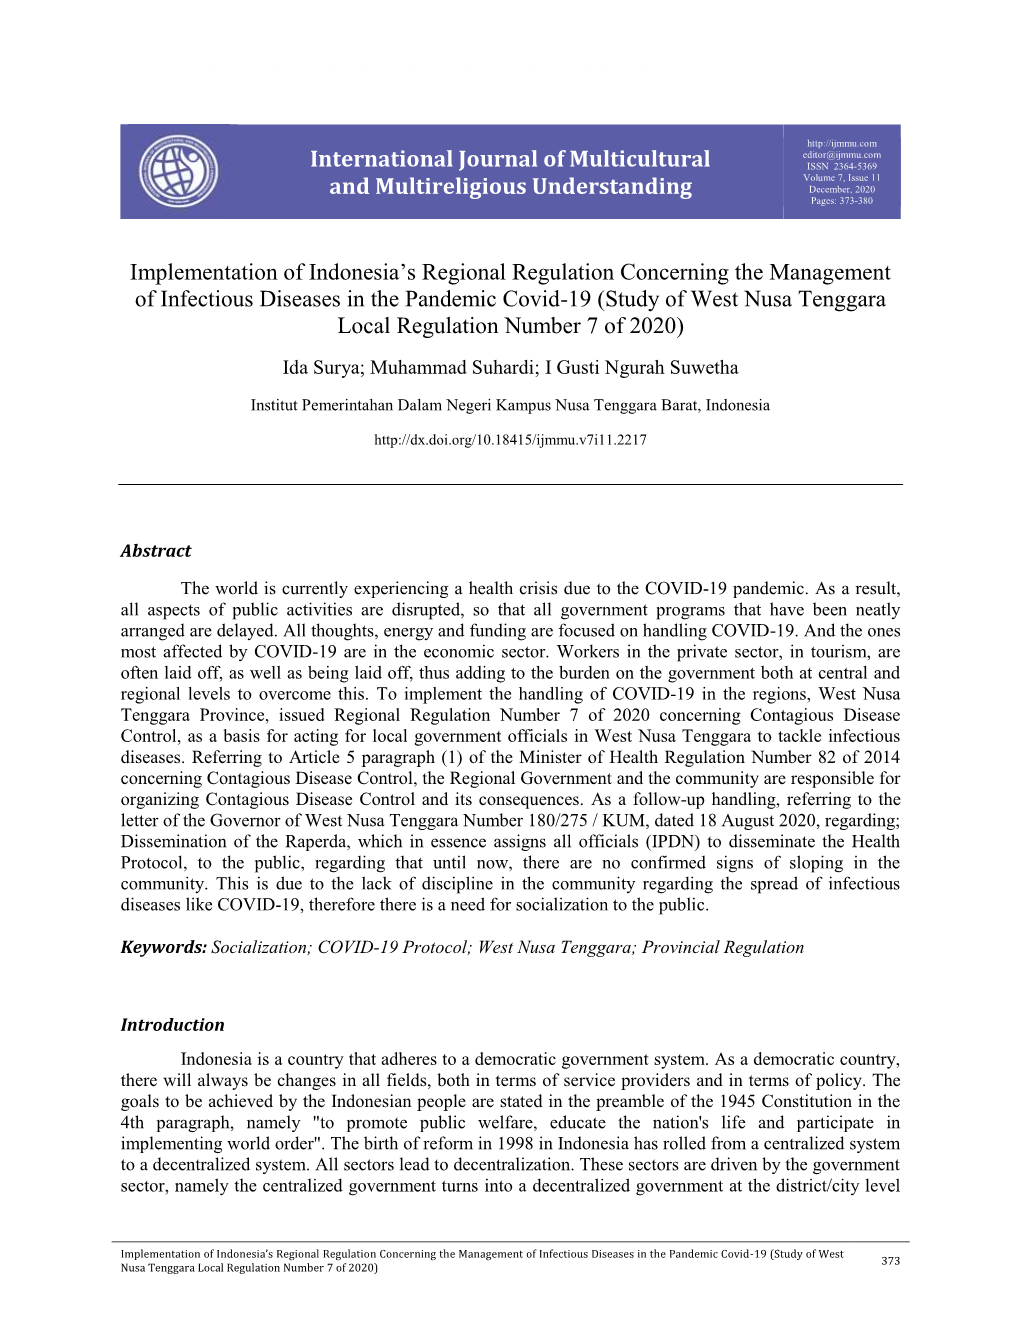 International Journal of Multicultural and Multireligious Understanding Implementation of Indonesia's Regional Regulation Conc